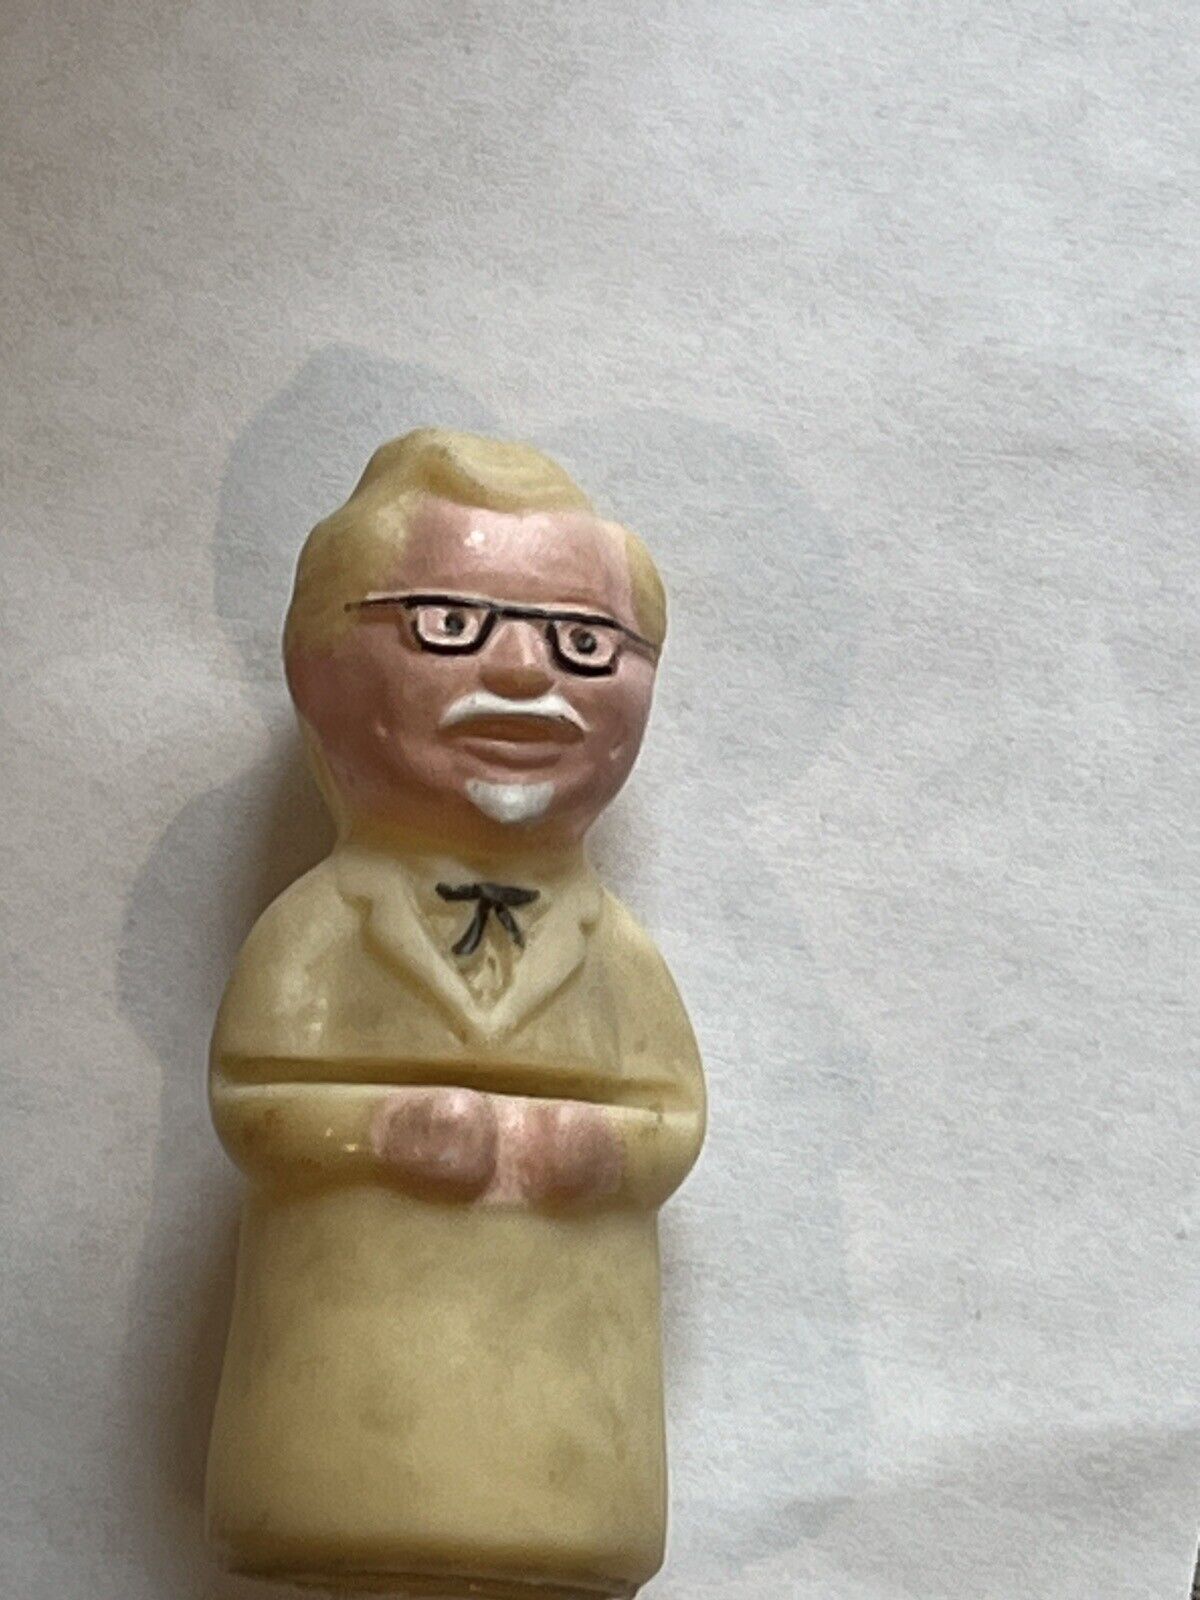 VERY Rare Vintage Colonel Sanders 2 1/4” Rubber Puppet Kentucky Fried Chicken